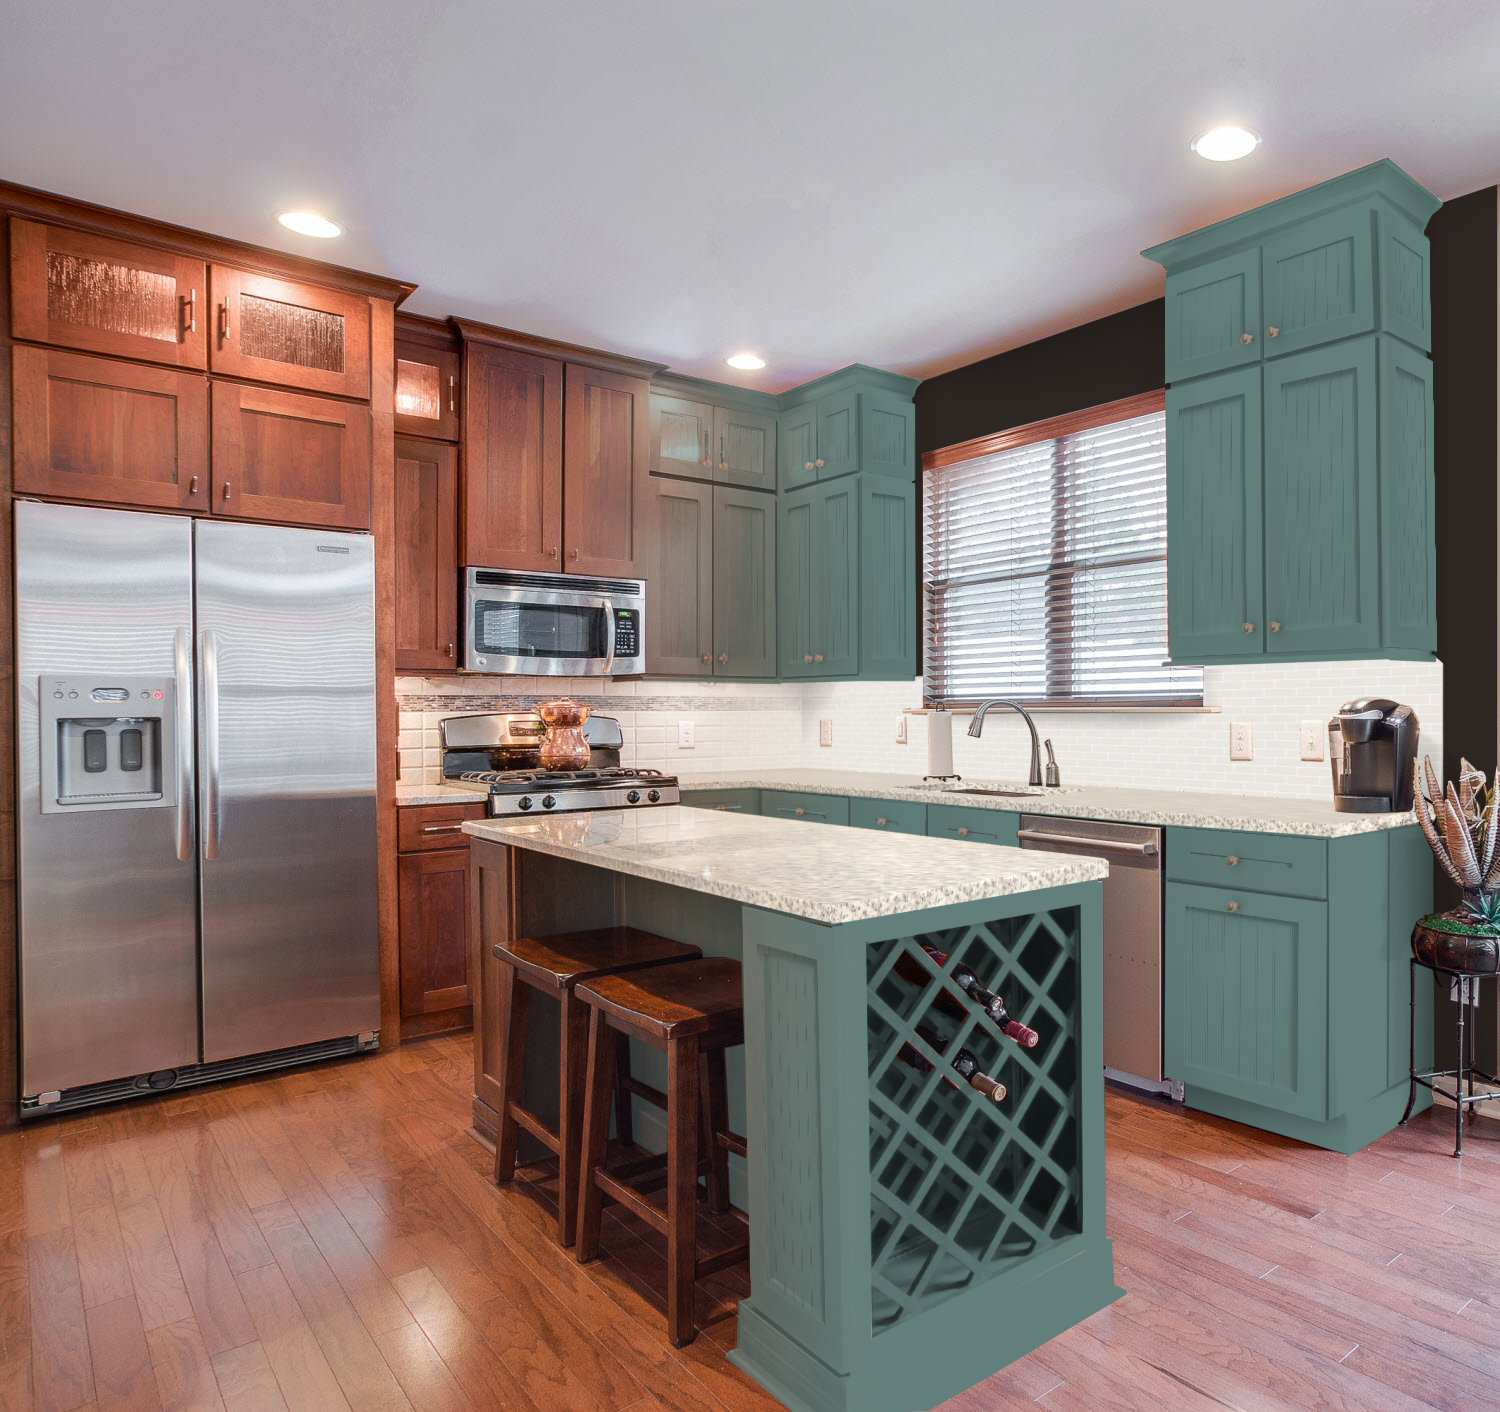 Kitchen Counter And Cabinet Finish Combinations - Royal Palm Closet